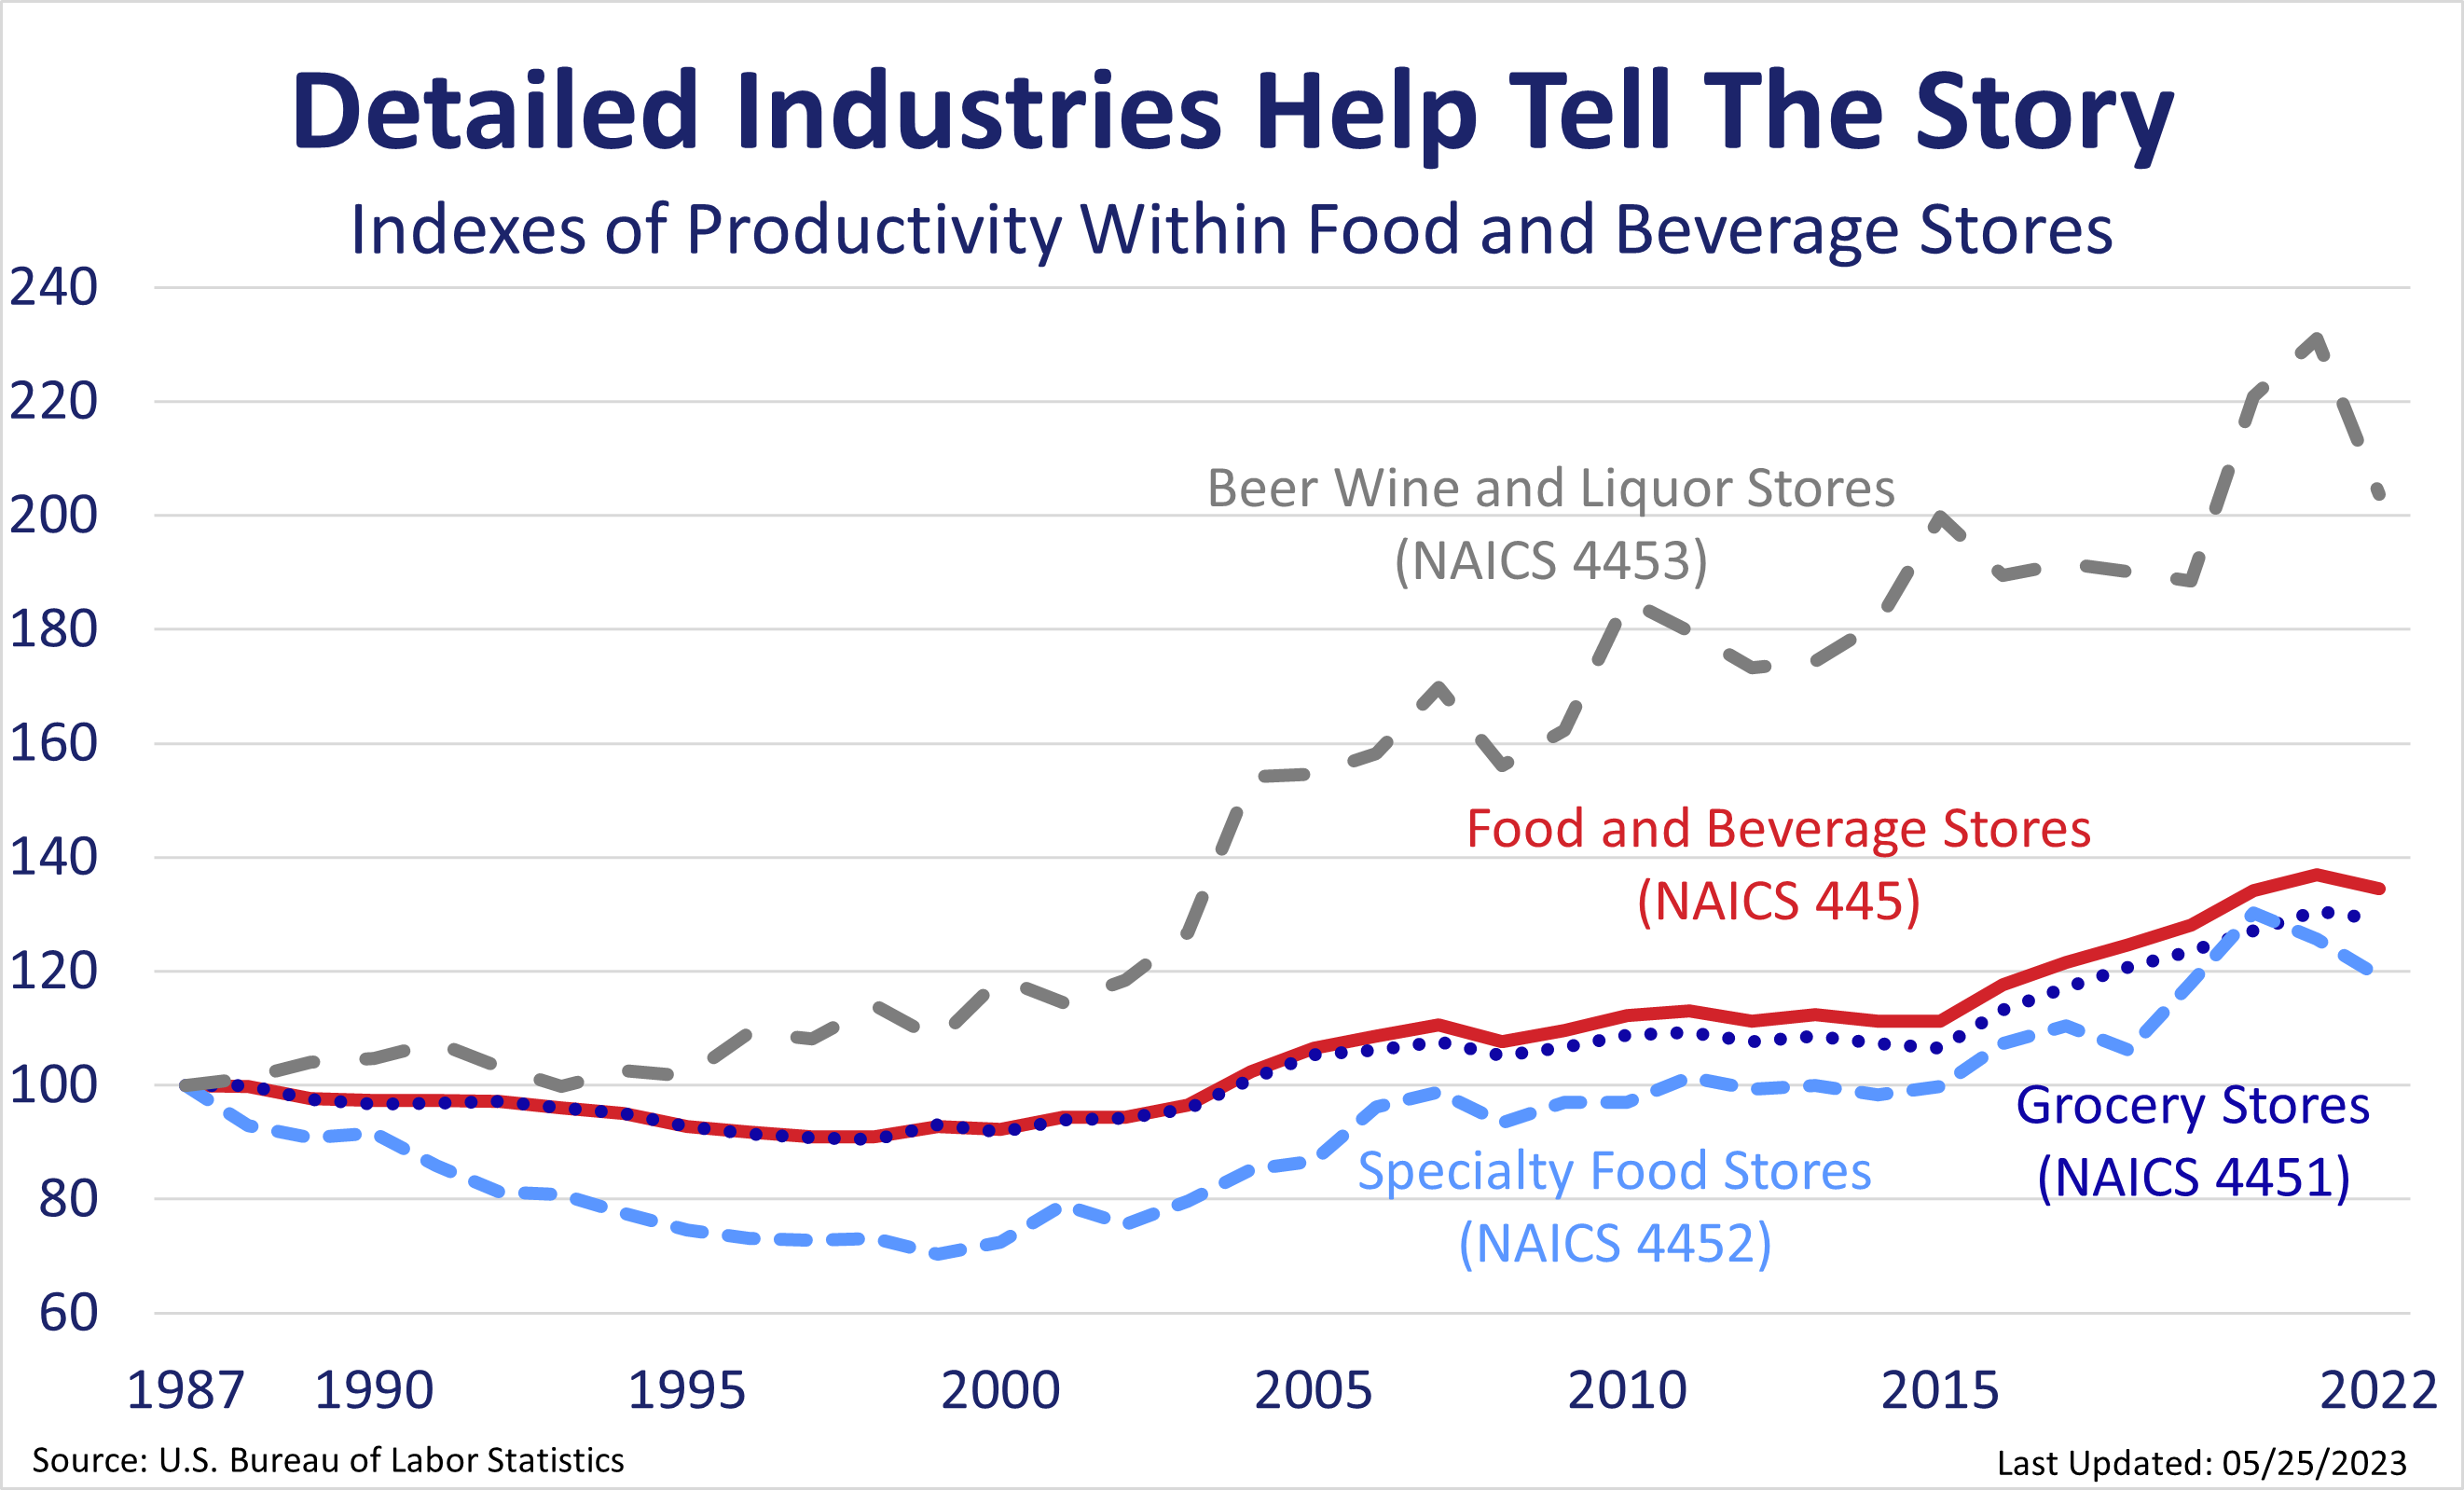 Line graph of detailed industries labor productivity indexes of food and beverage store industries: Beer and wine liquor stores (NAICS 4453), Food and beverage stores (NAICS 445), Grocery stores (NAICS 4451), and Specialty food stores (NAICS 4452).  Chart data are included in the linked table below.